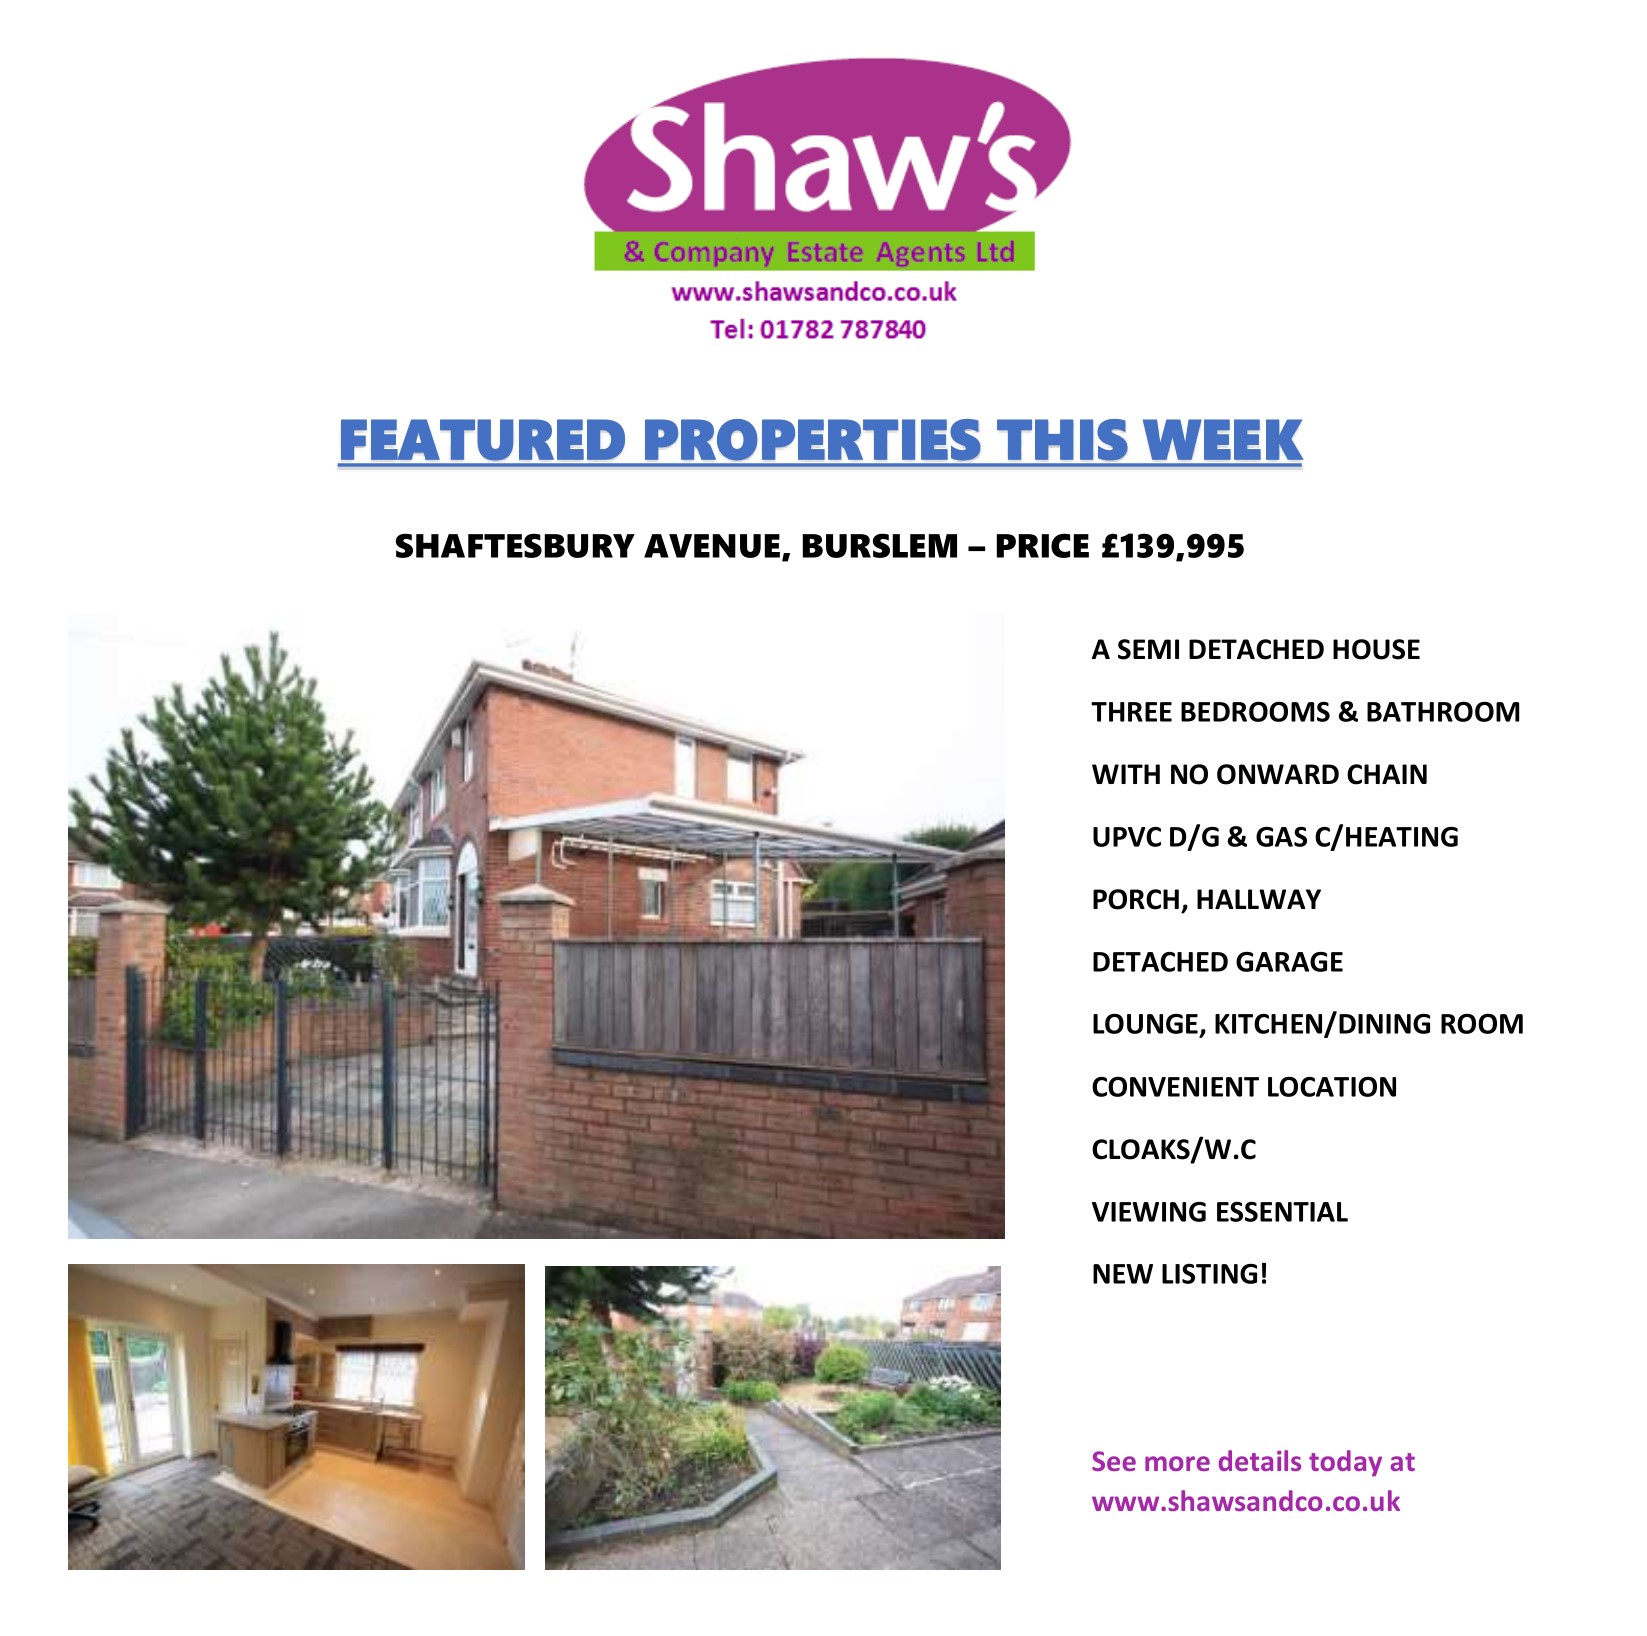 NEW & FEATURED PROPERTIES THIS WEEK!